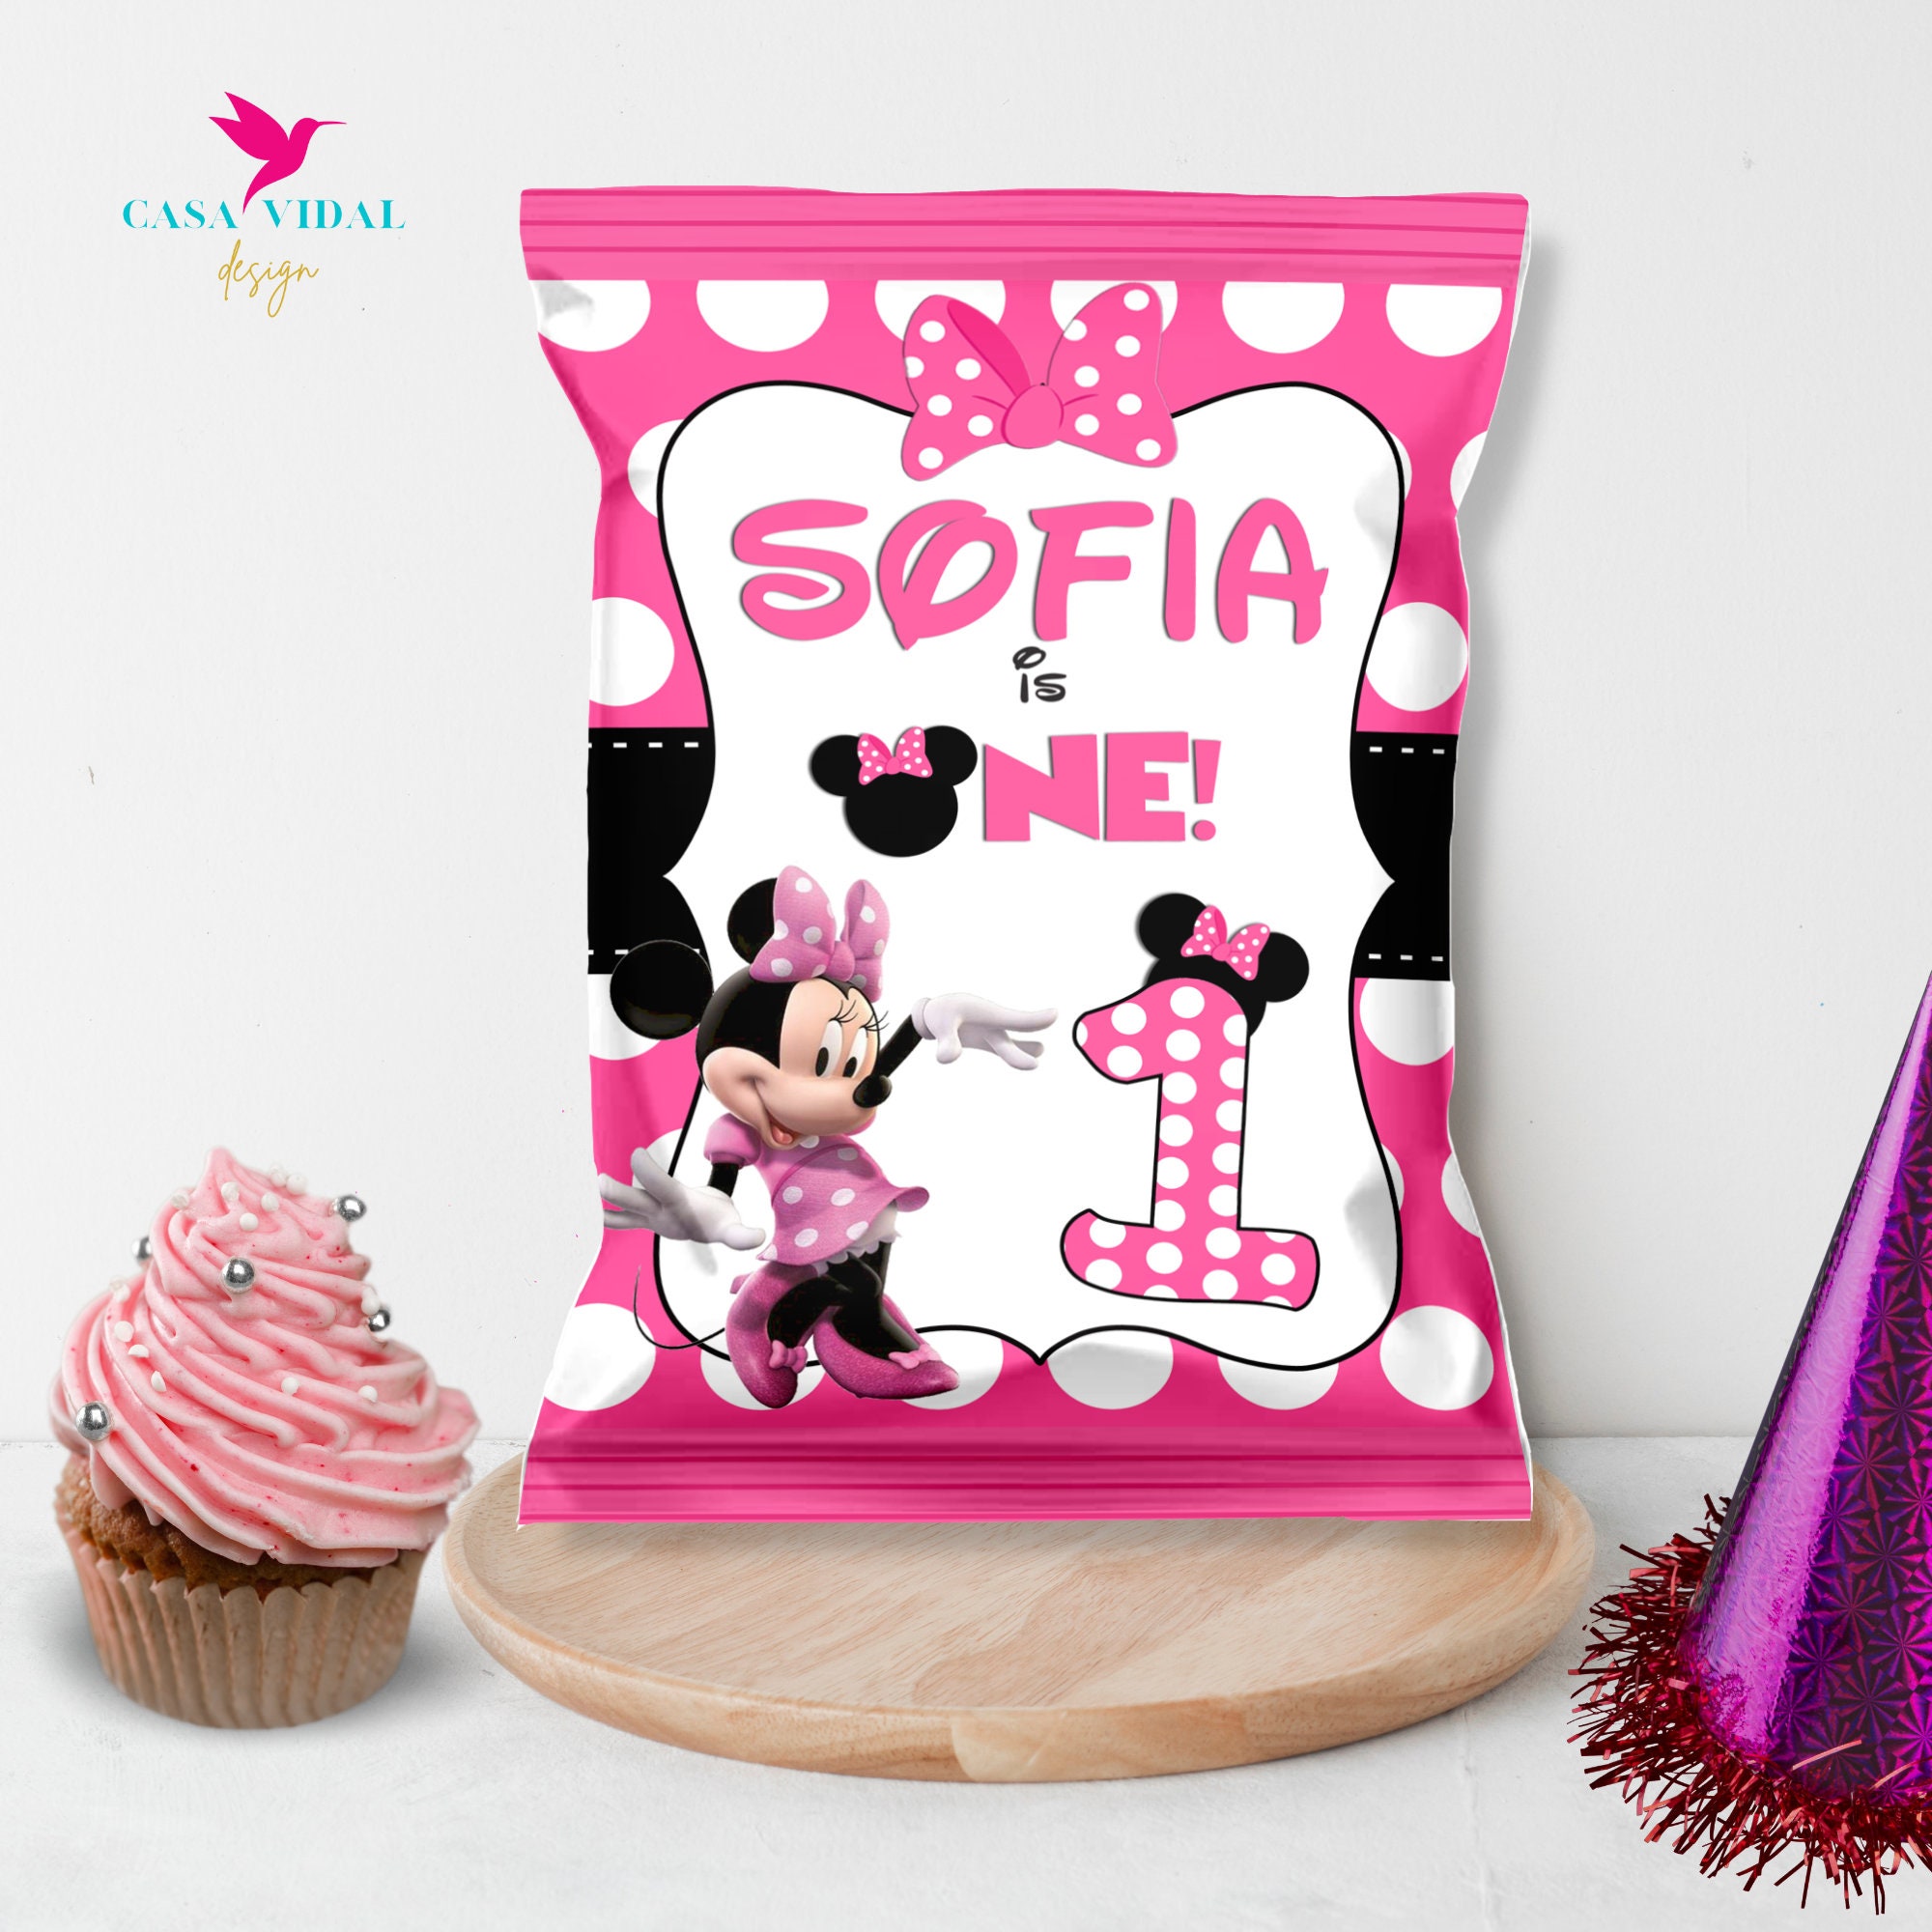 Mickey Mouse & Minnie Mouse themed Chip Bag 🥰🤫 * * Templates